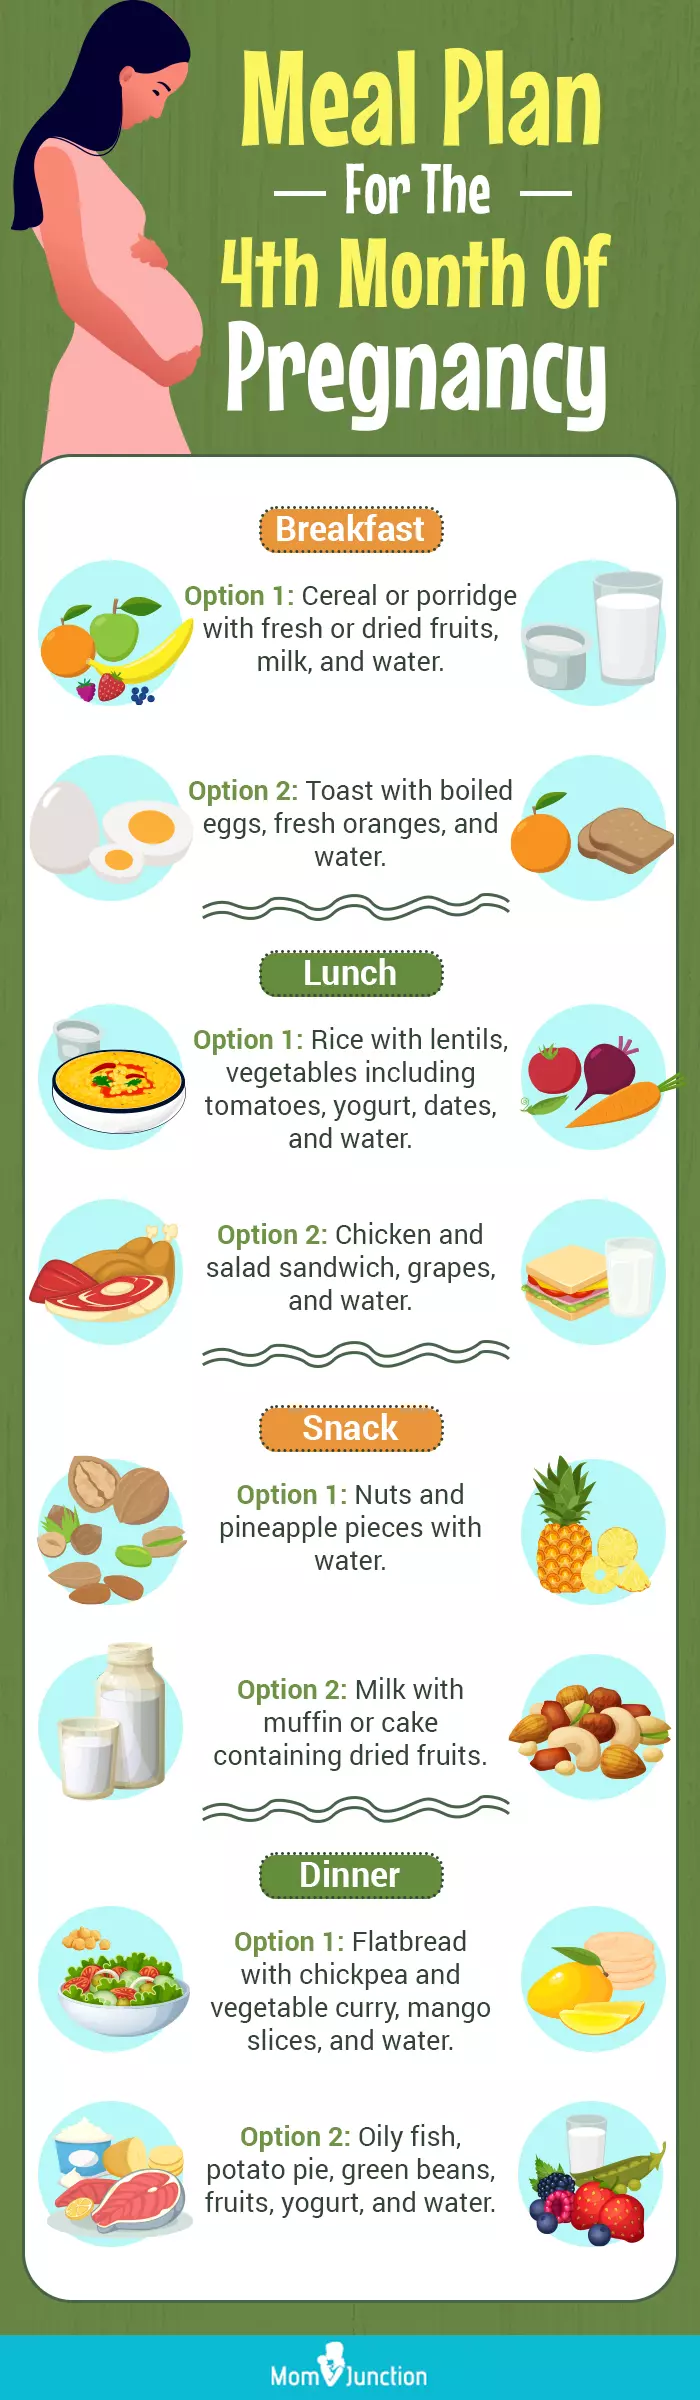 meal plan for the 4th month of pregnancy (infographic)